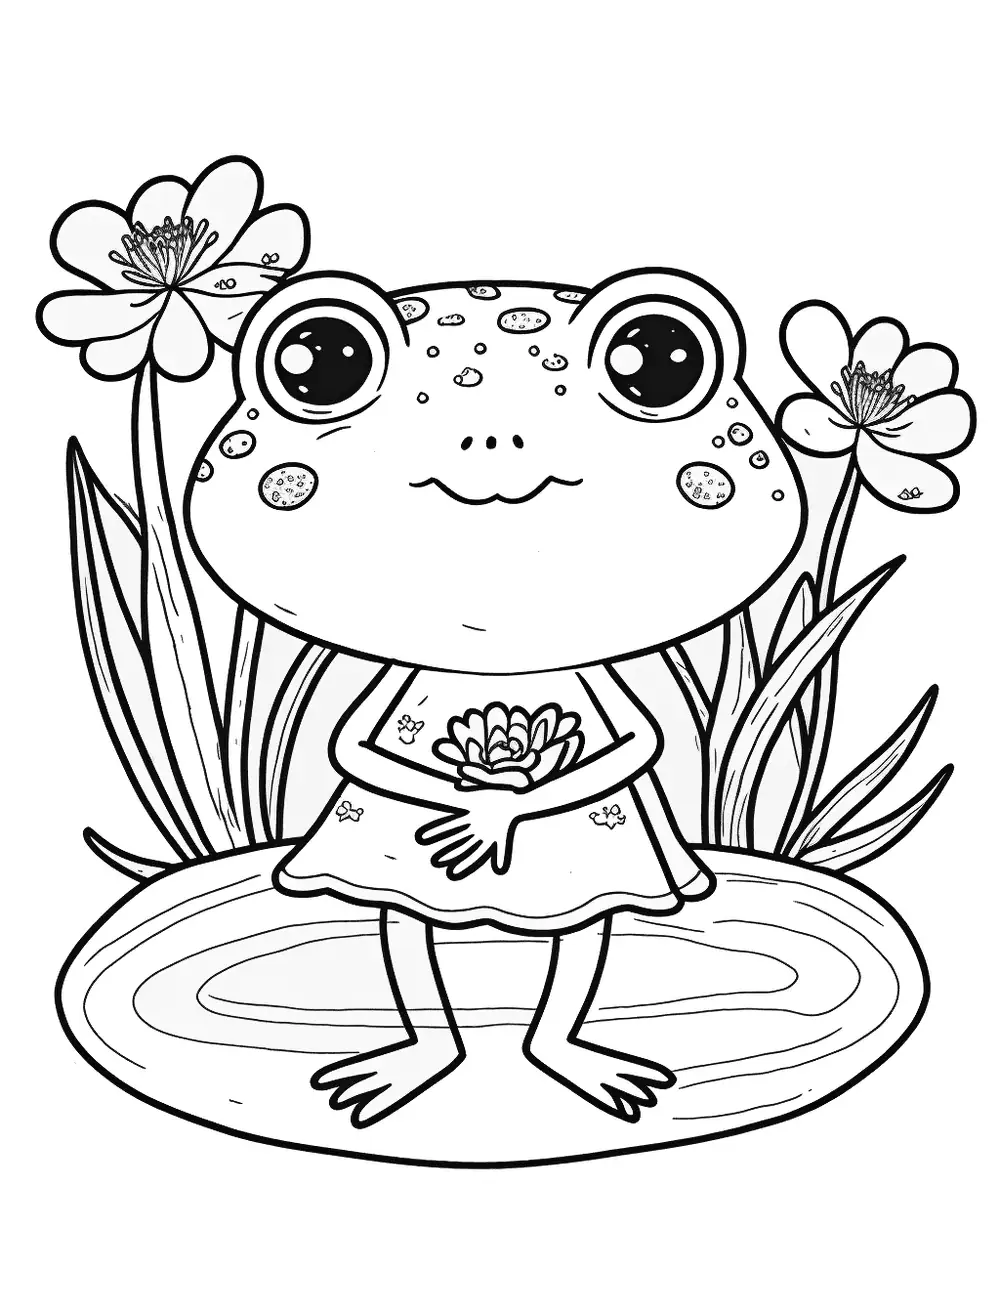 Girl Frog With Flowers Coloring Page - A girl frog with a bow in her hair, carrying a bouquet of flowers.